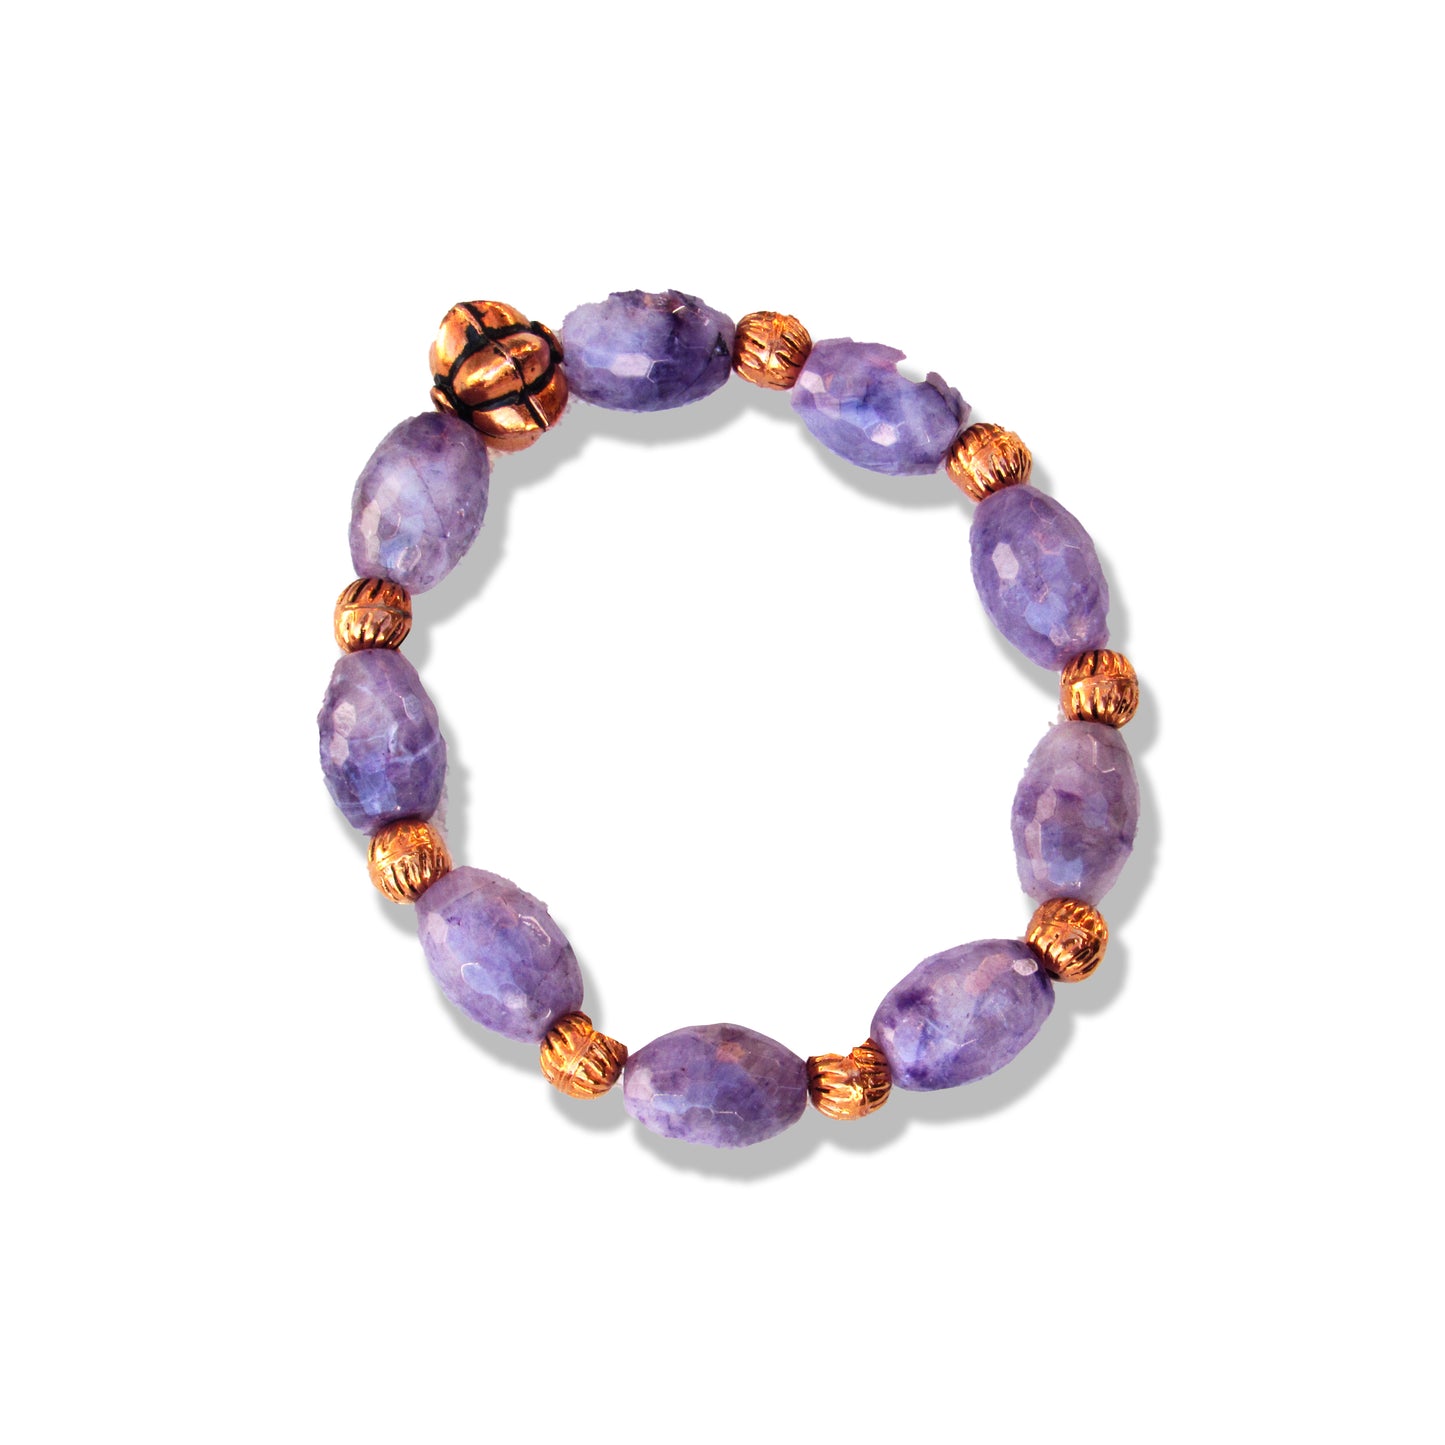 Charoite gemstone and Copper beaded Stretch bracelet